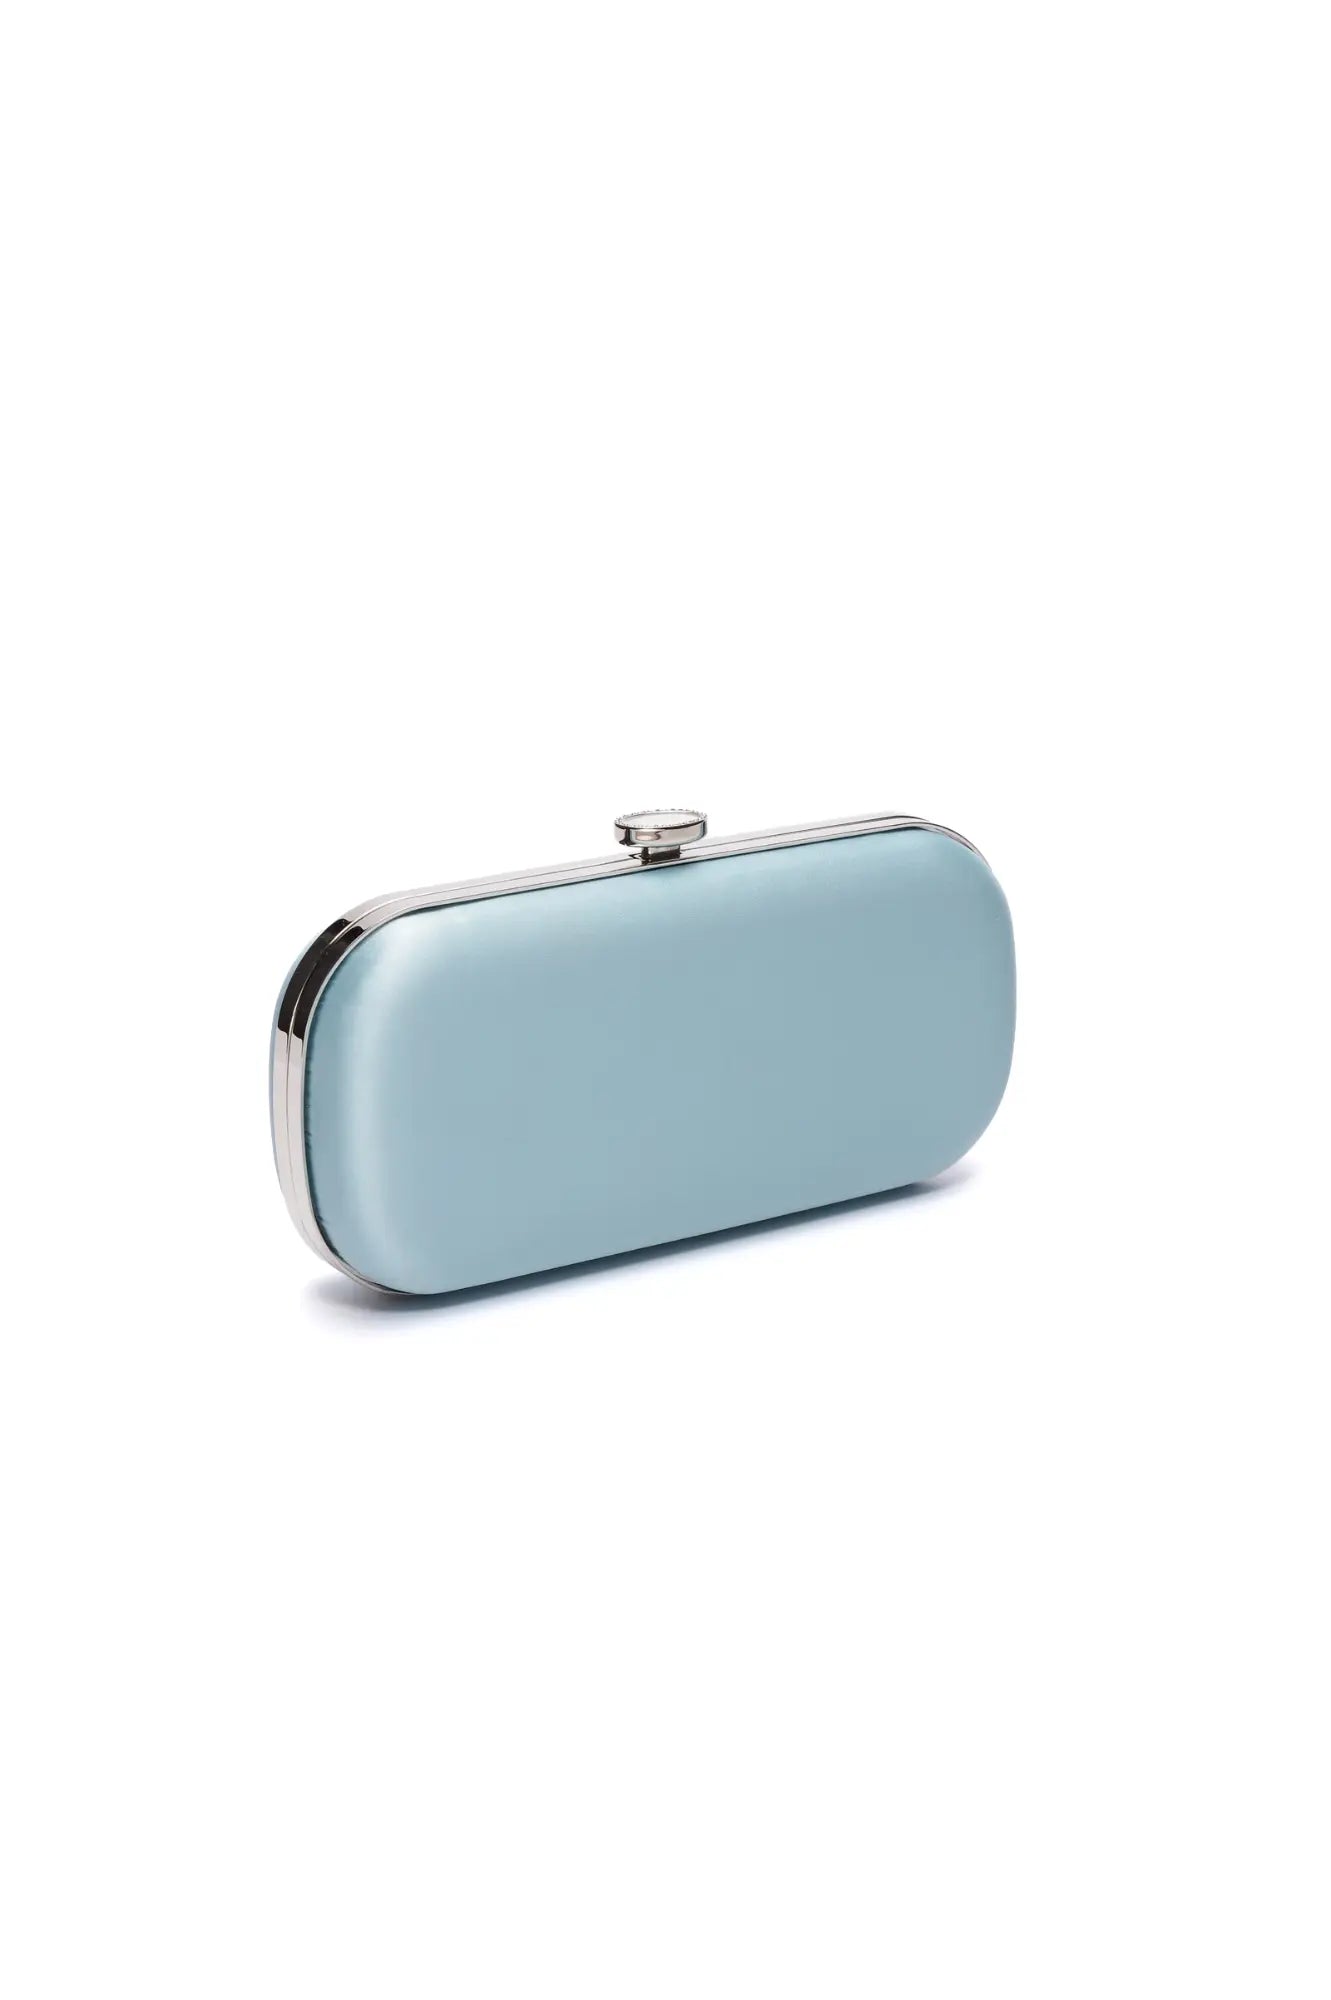 Light blue &quot;Bella Clutch Cinderella Blue Petite&quot; purse with metallic clasp on a white background, designed as a custom wedding accessory by The Bella Rosa Collection.